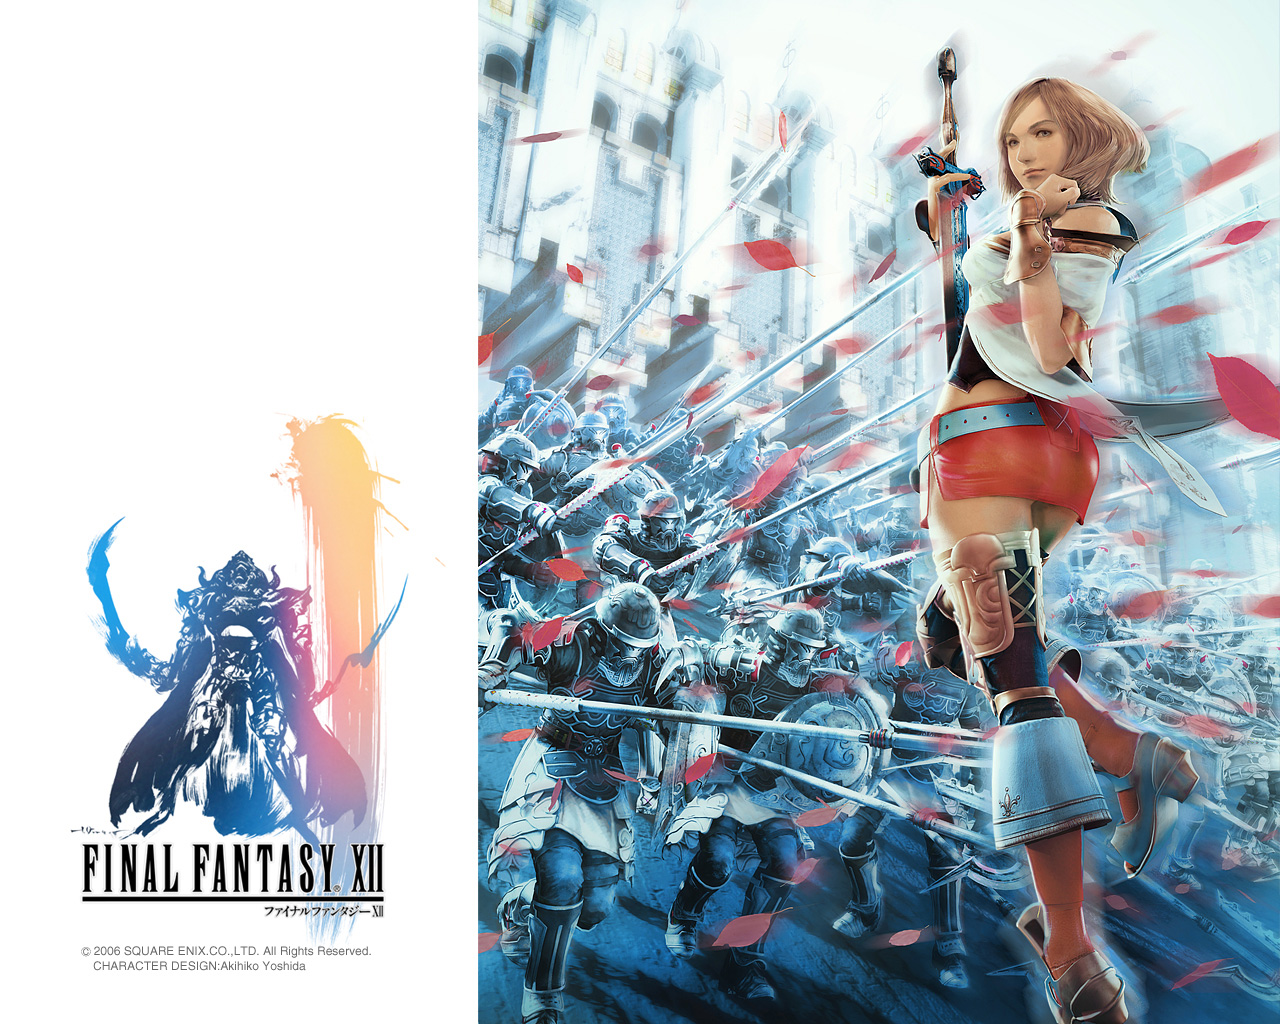 ffxii wallpaper,graphic design,poster,album cover,fictional character,art